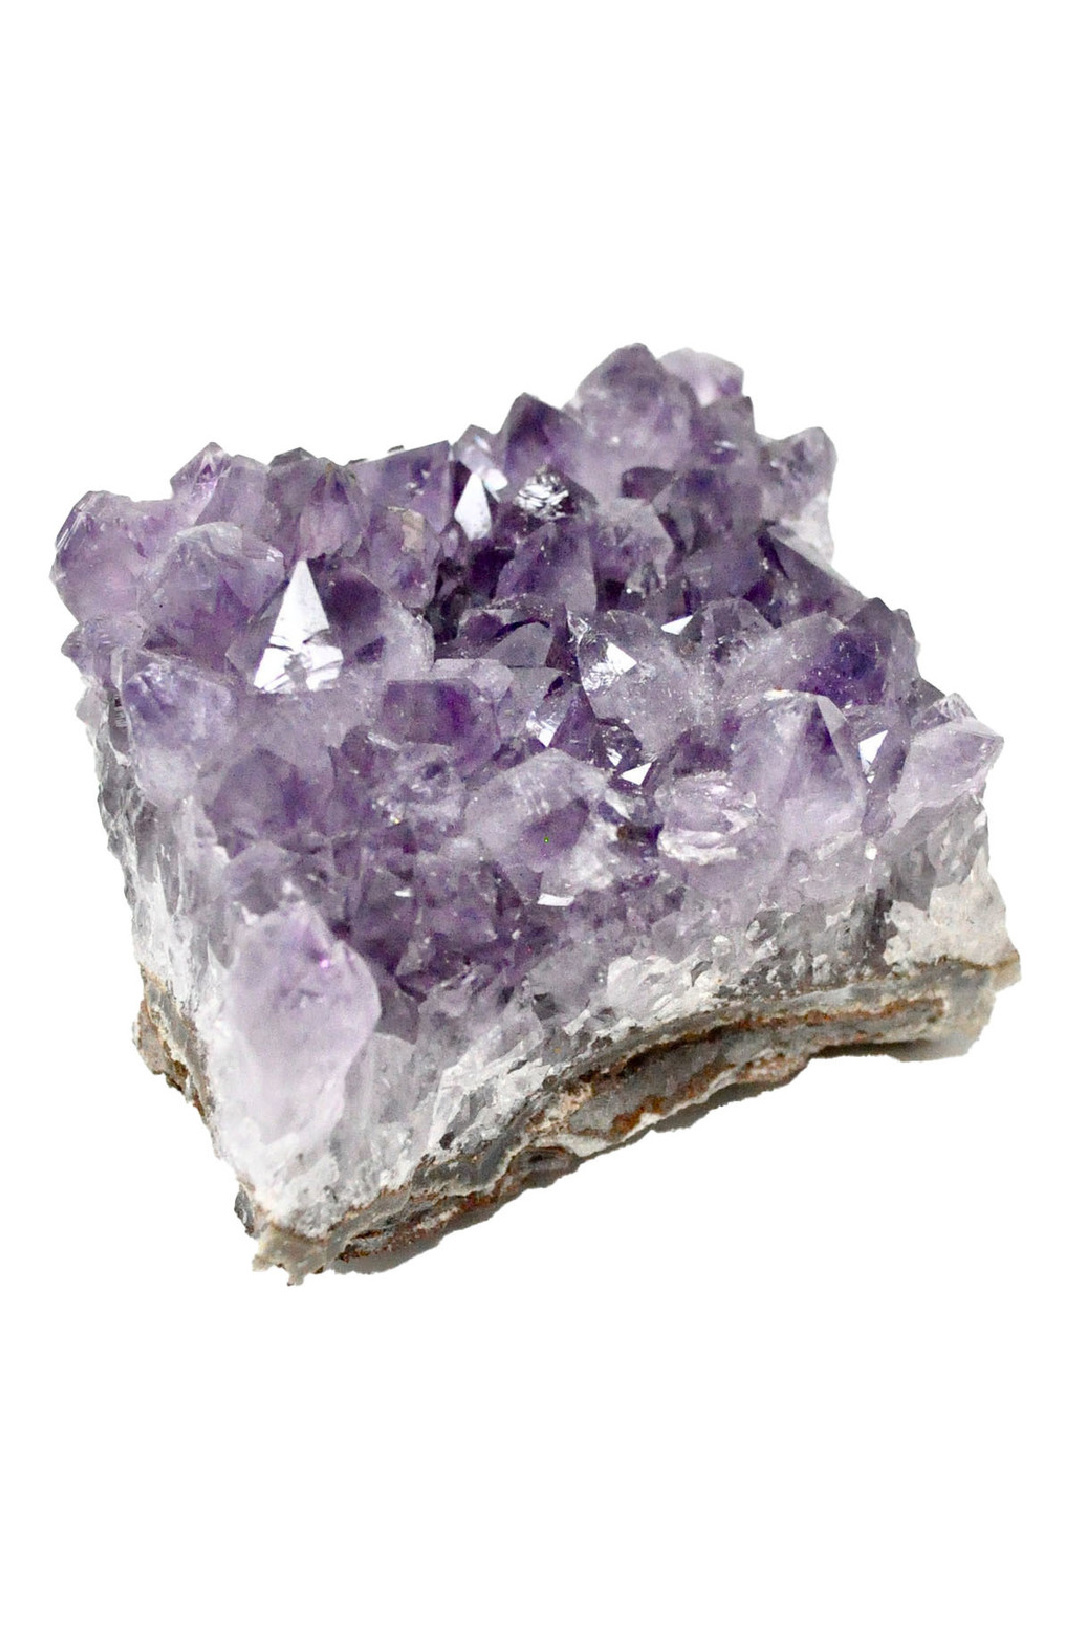 Large amethyst cluster with grey crust and lavender colored needle-like points